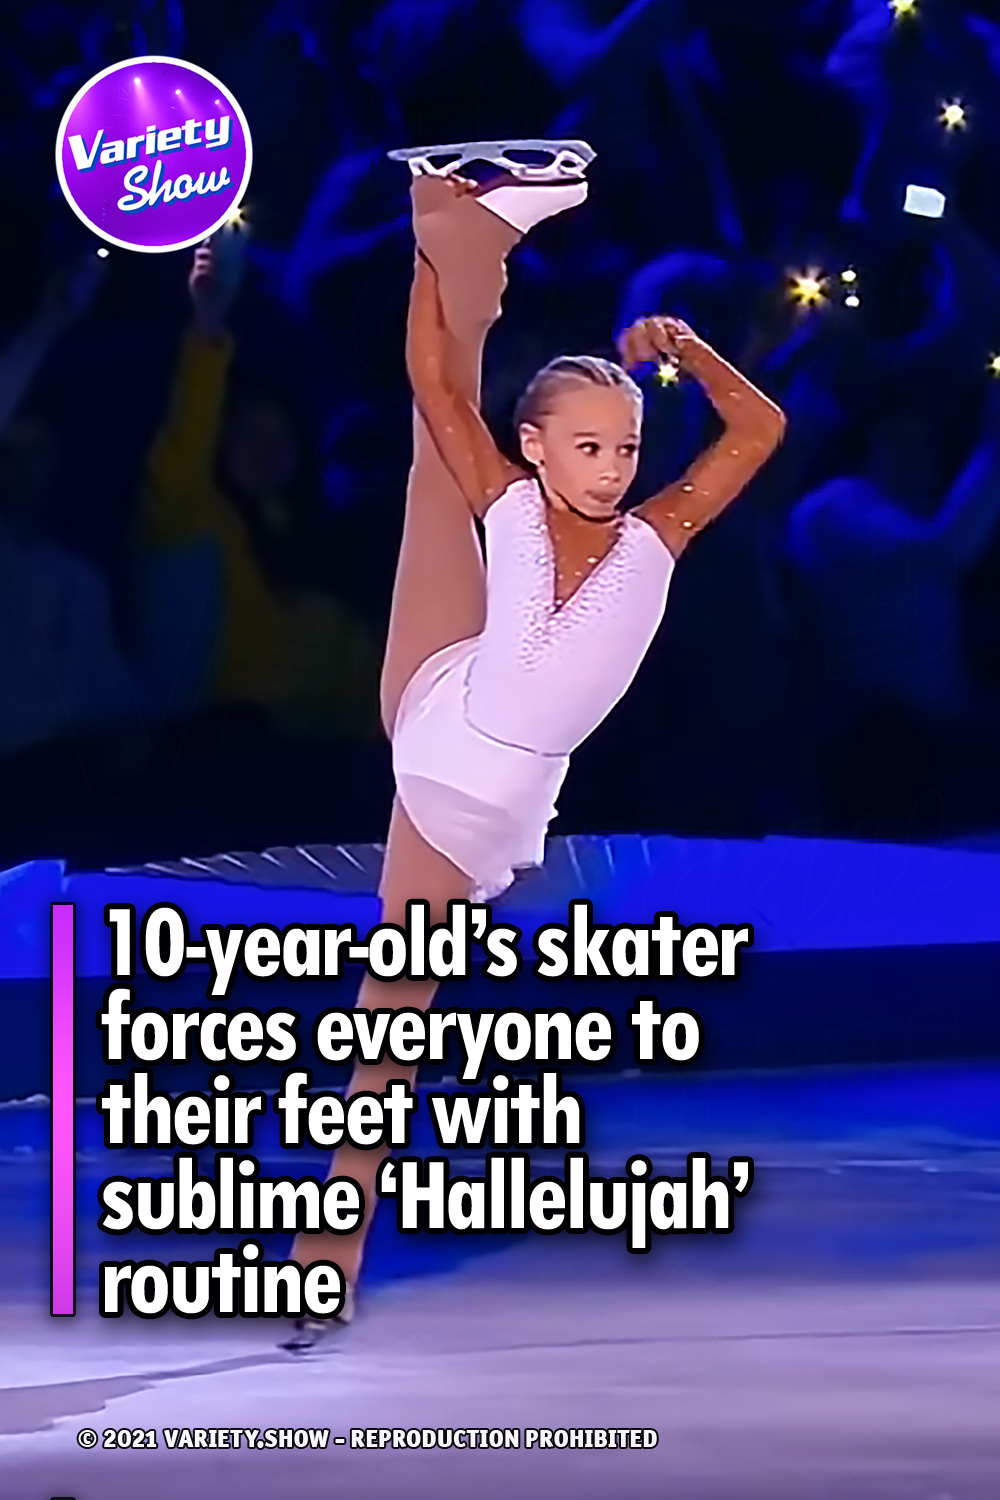 10-year-old’s skater forces everyone to their feet with sublime \'Hallelujah\' routine